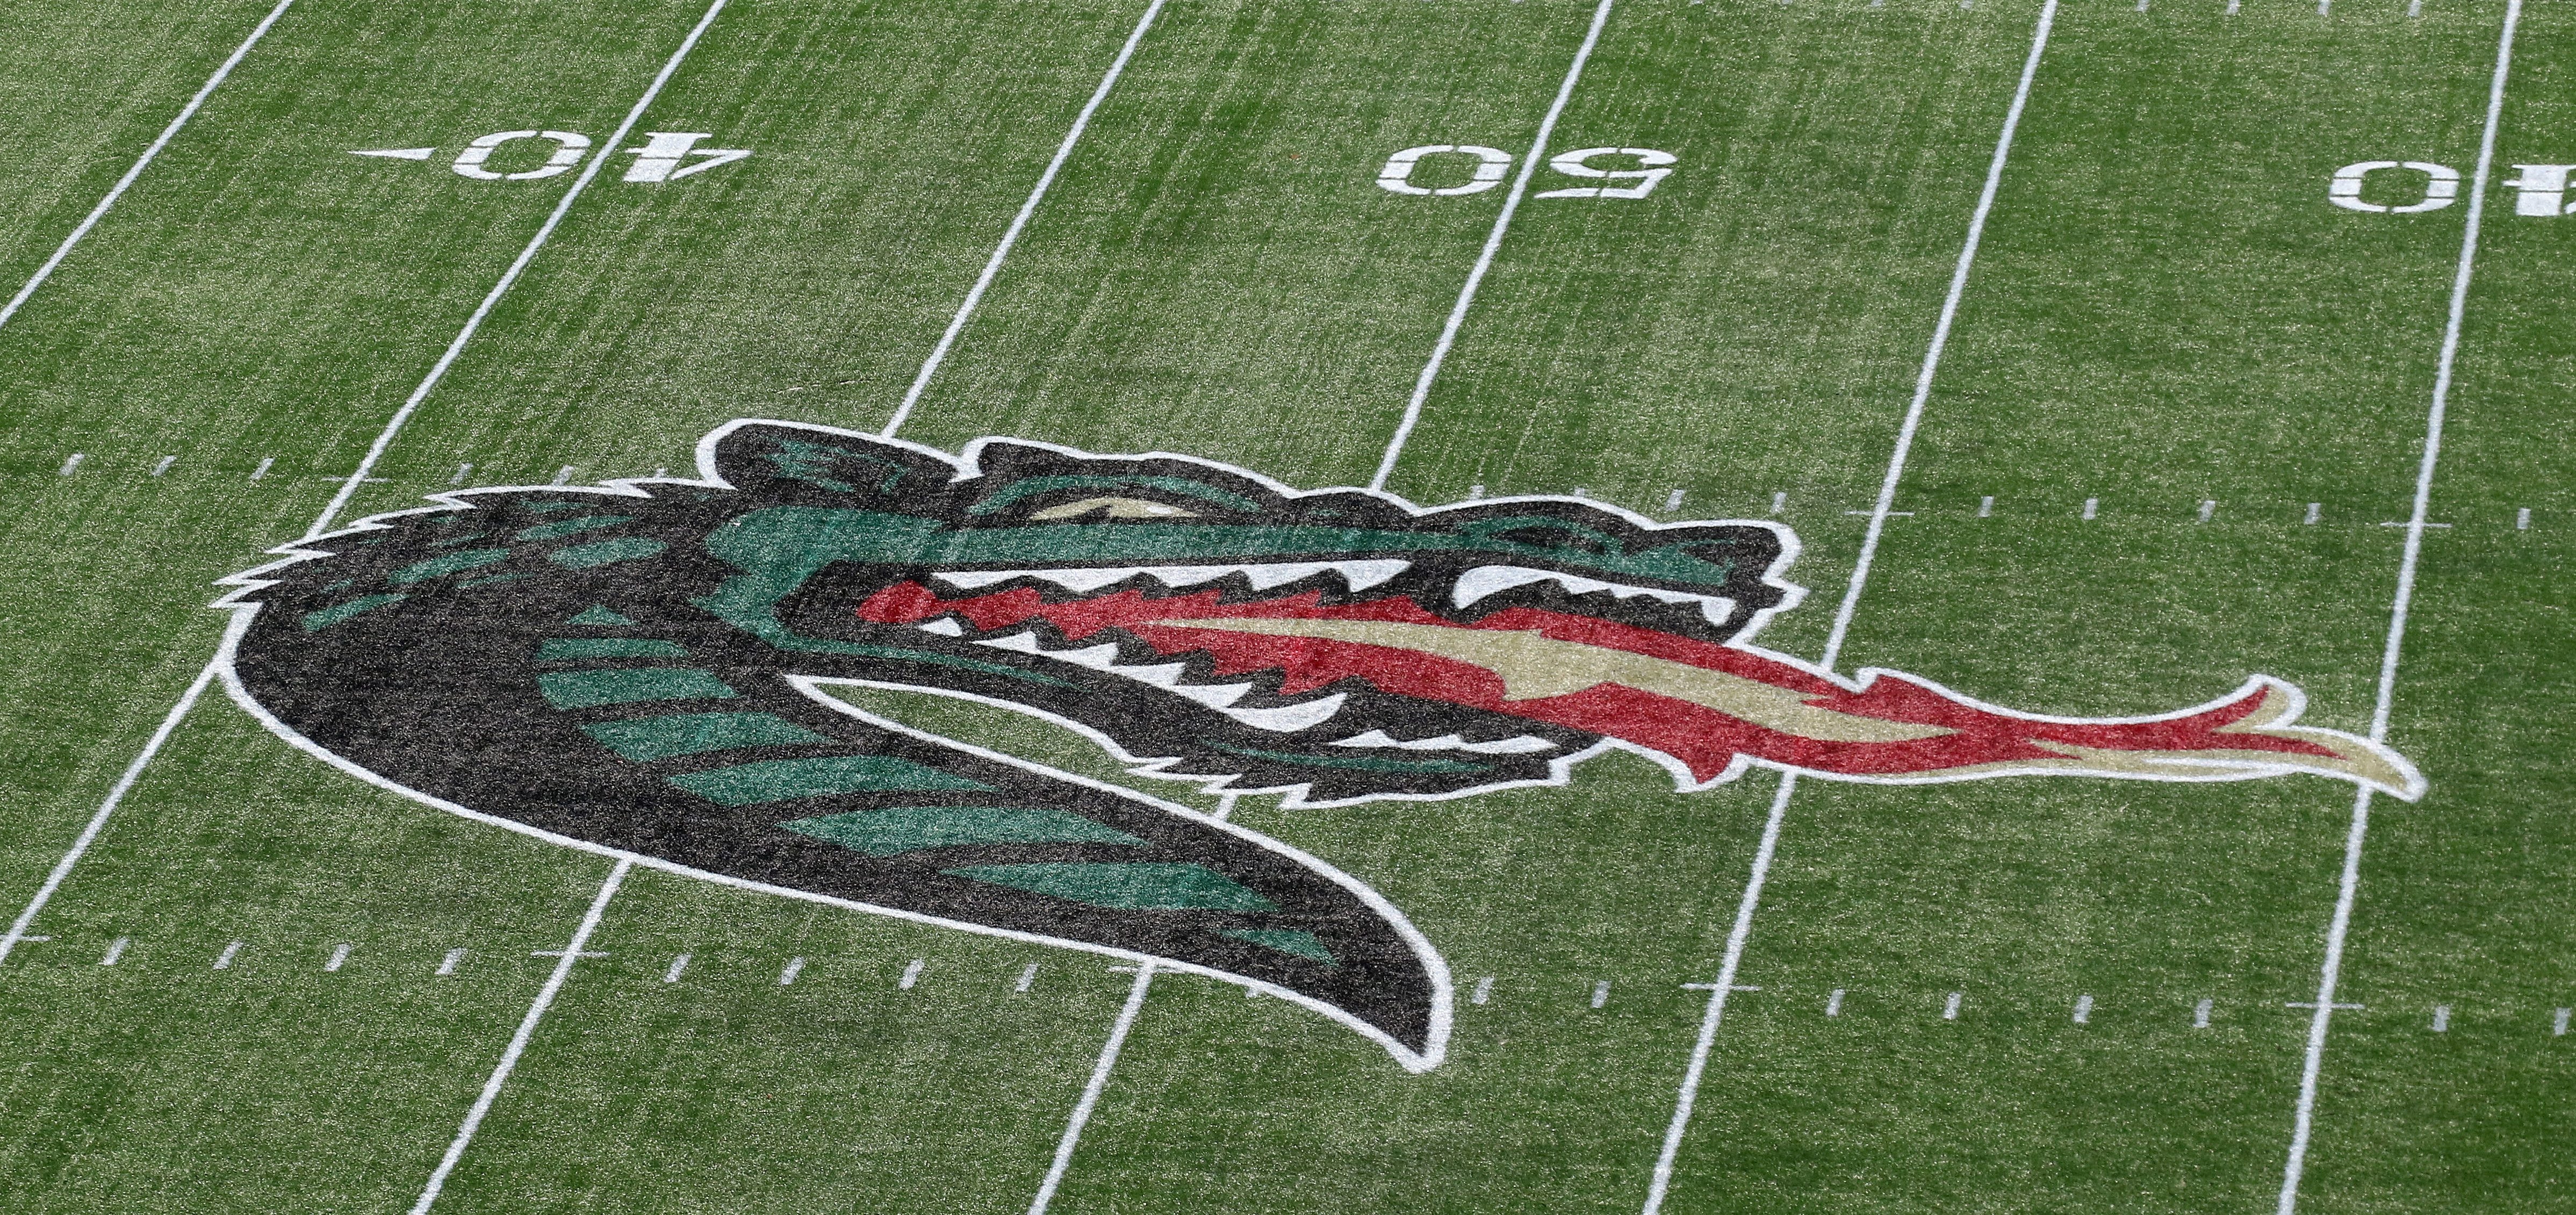 UAB football becomes first in NCAA DI to sign with college athlete
organization